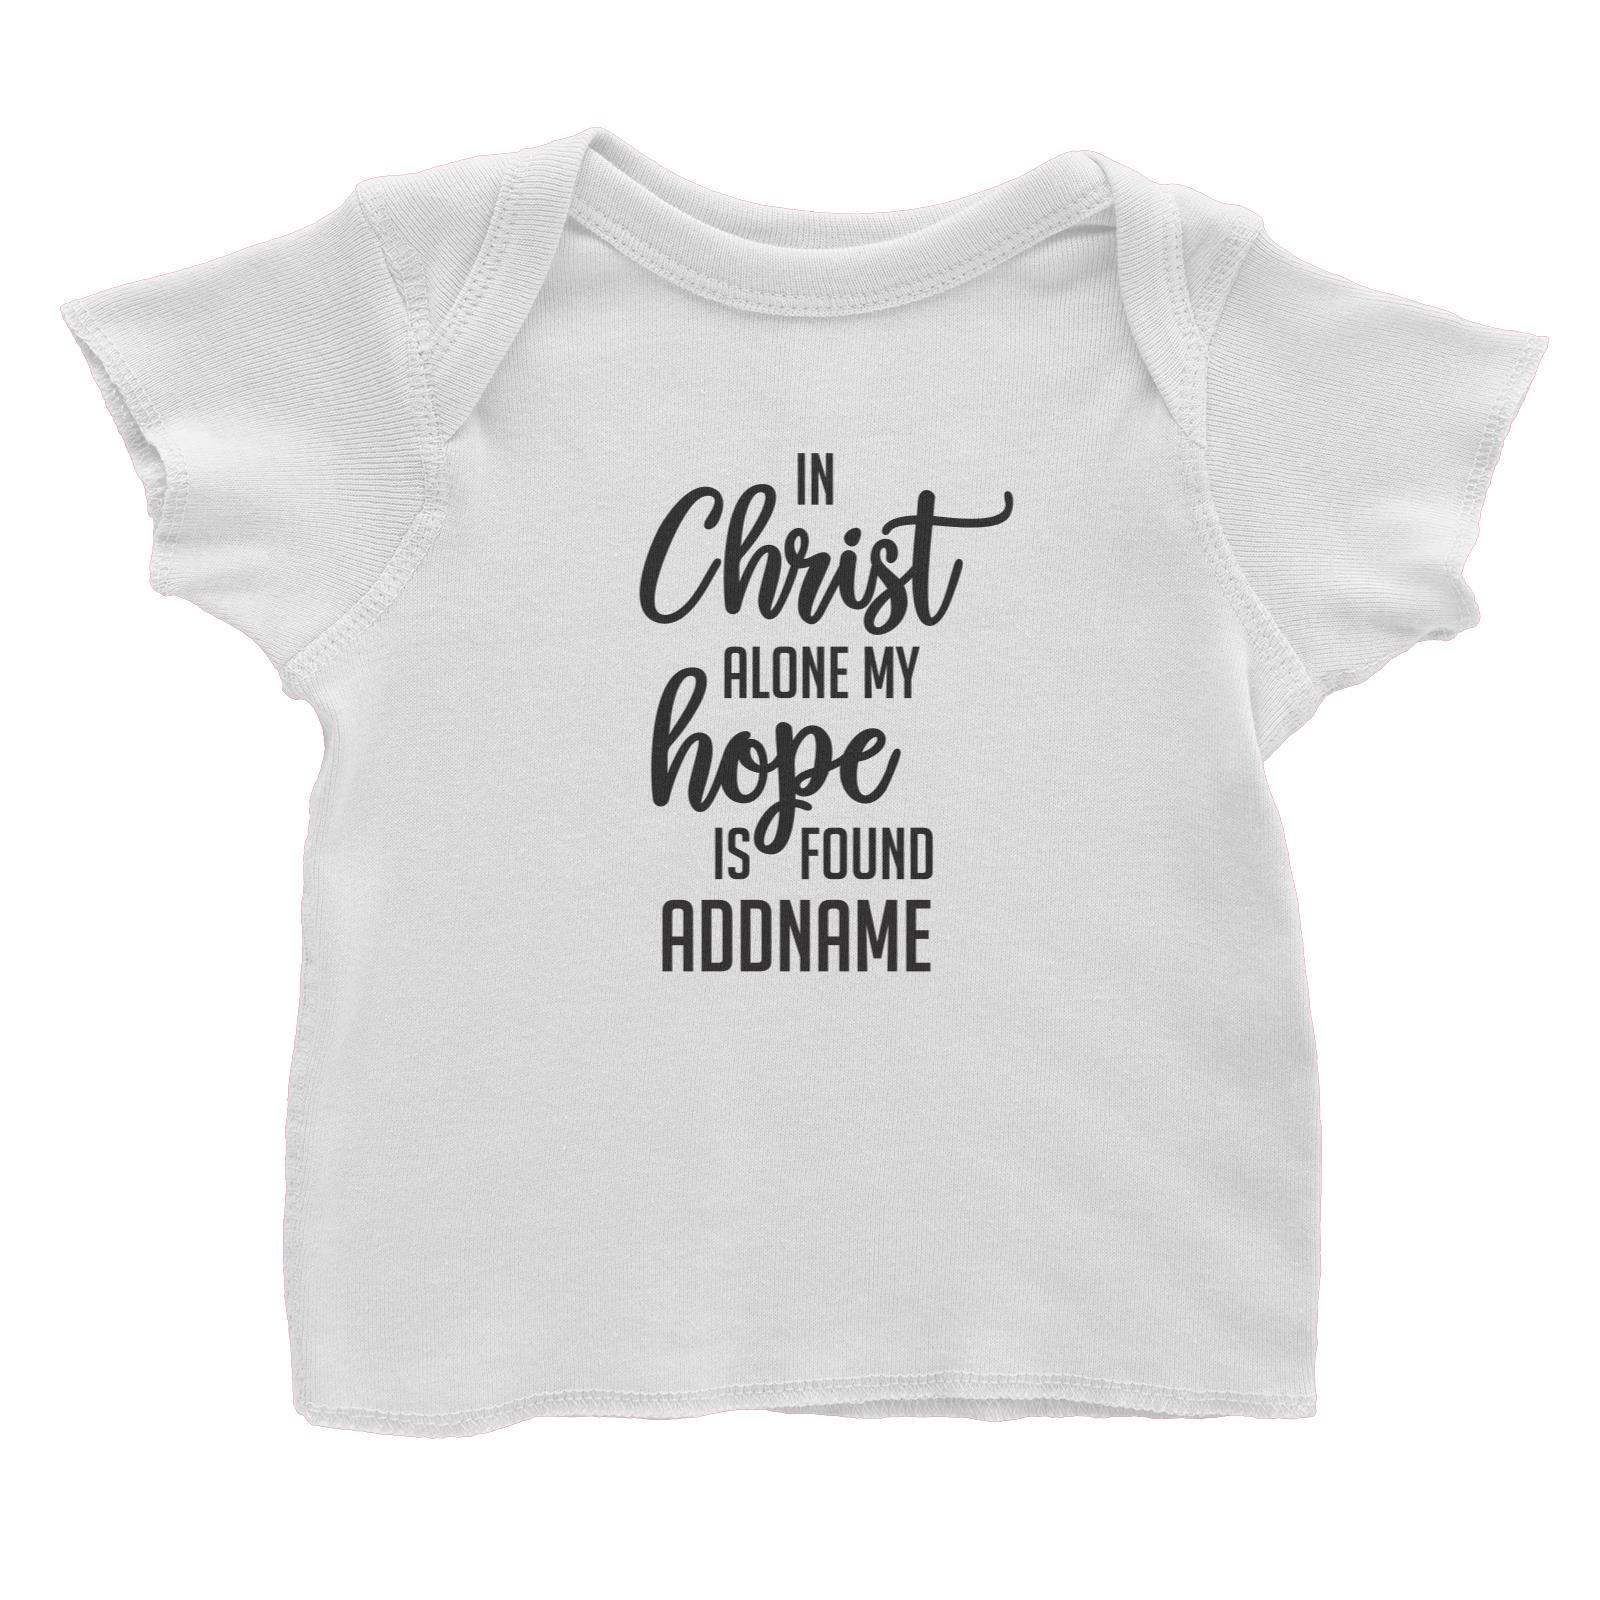 Christian Series In Christ Alone My Hope Is Found Addname Baby T-Shirt